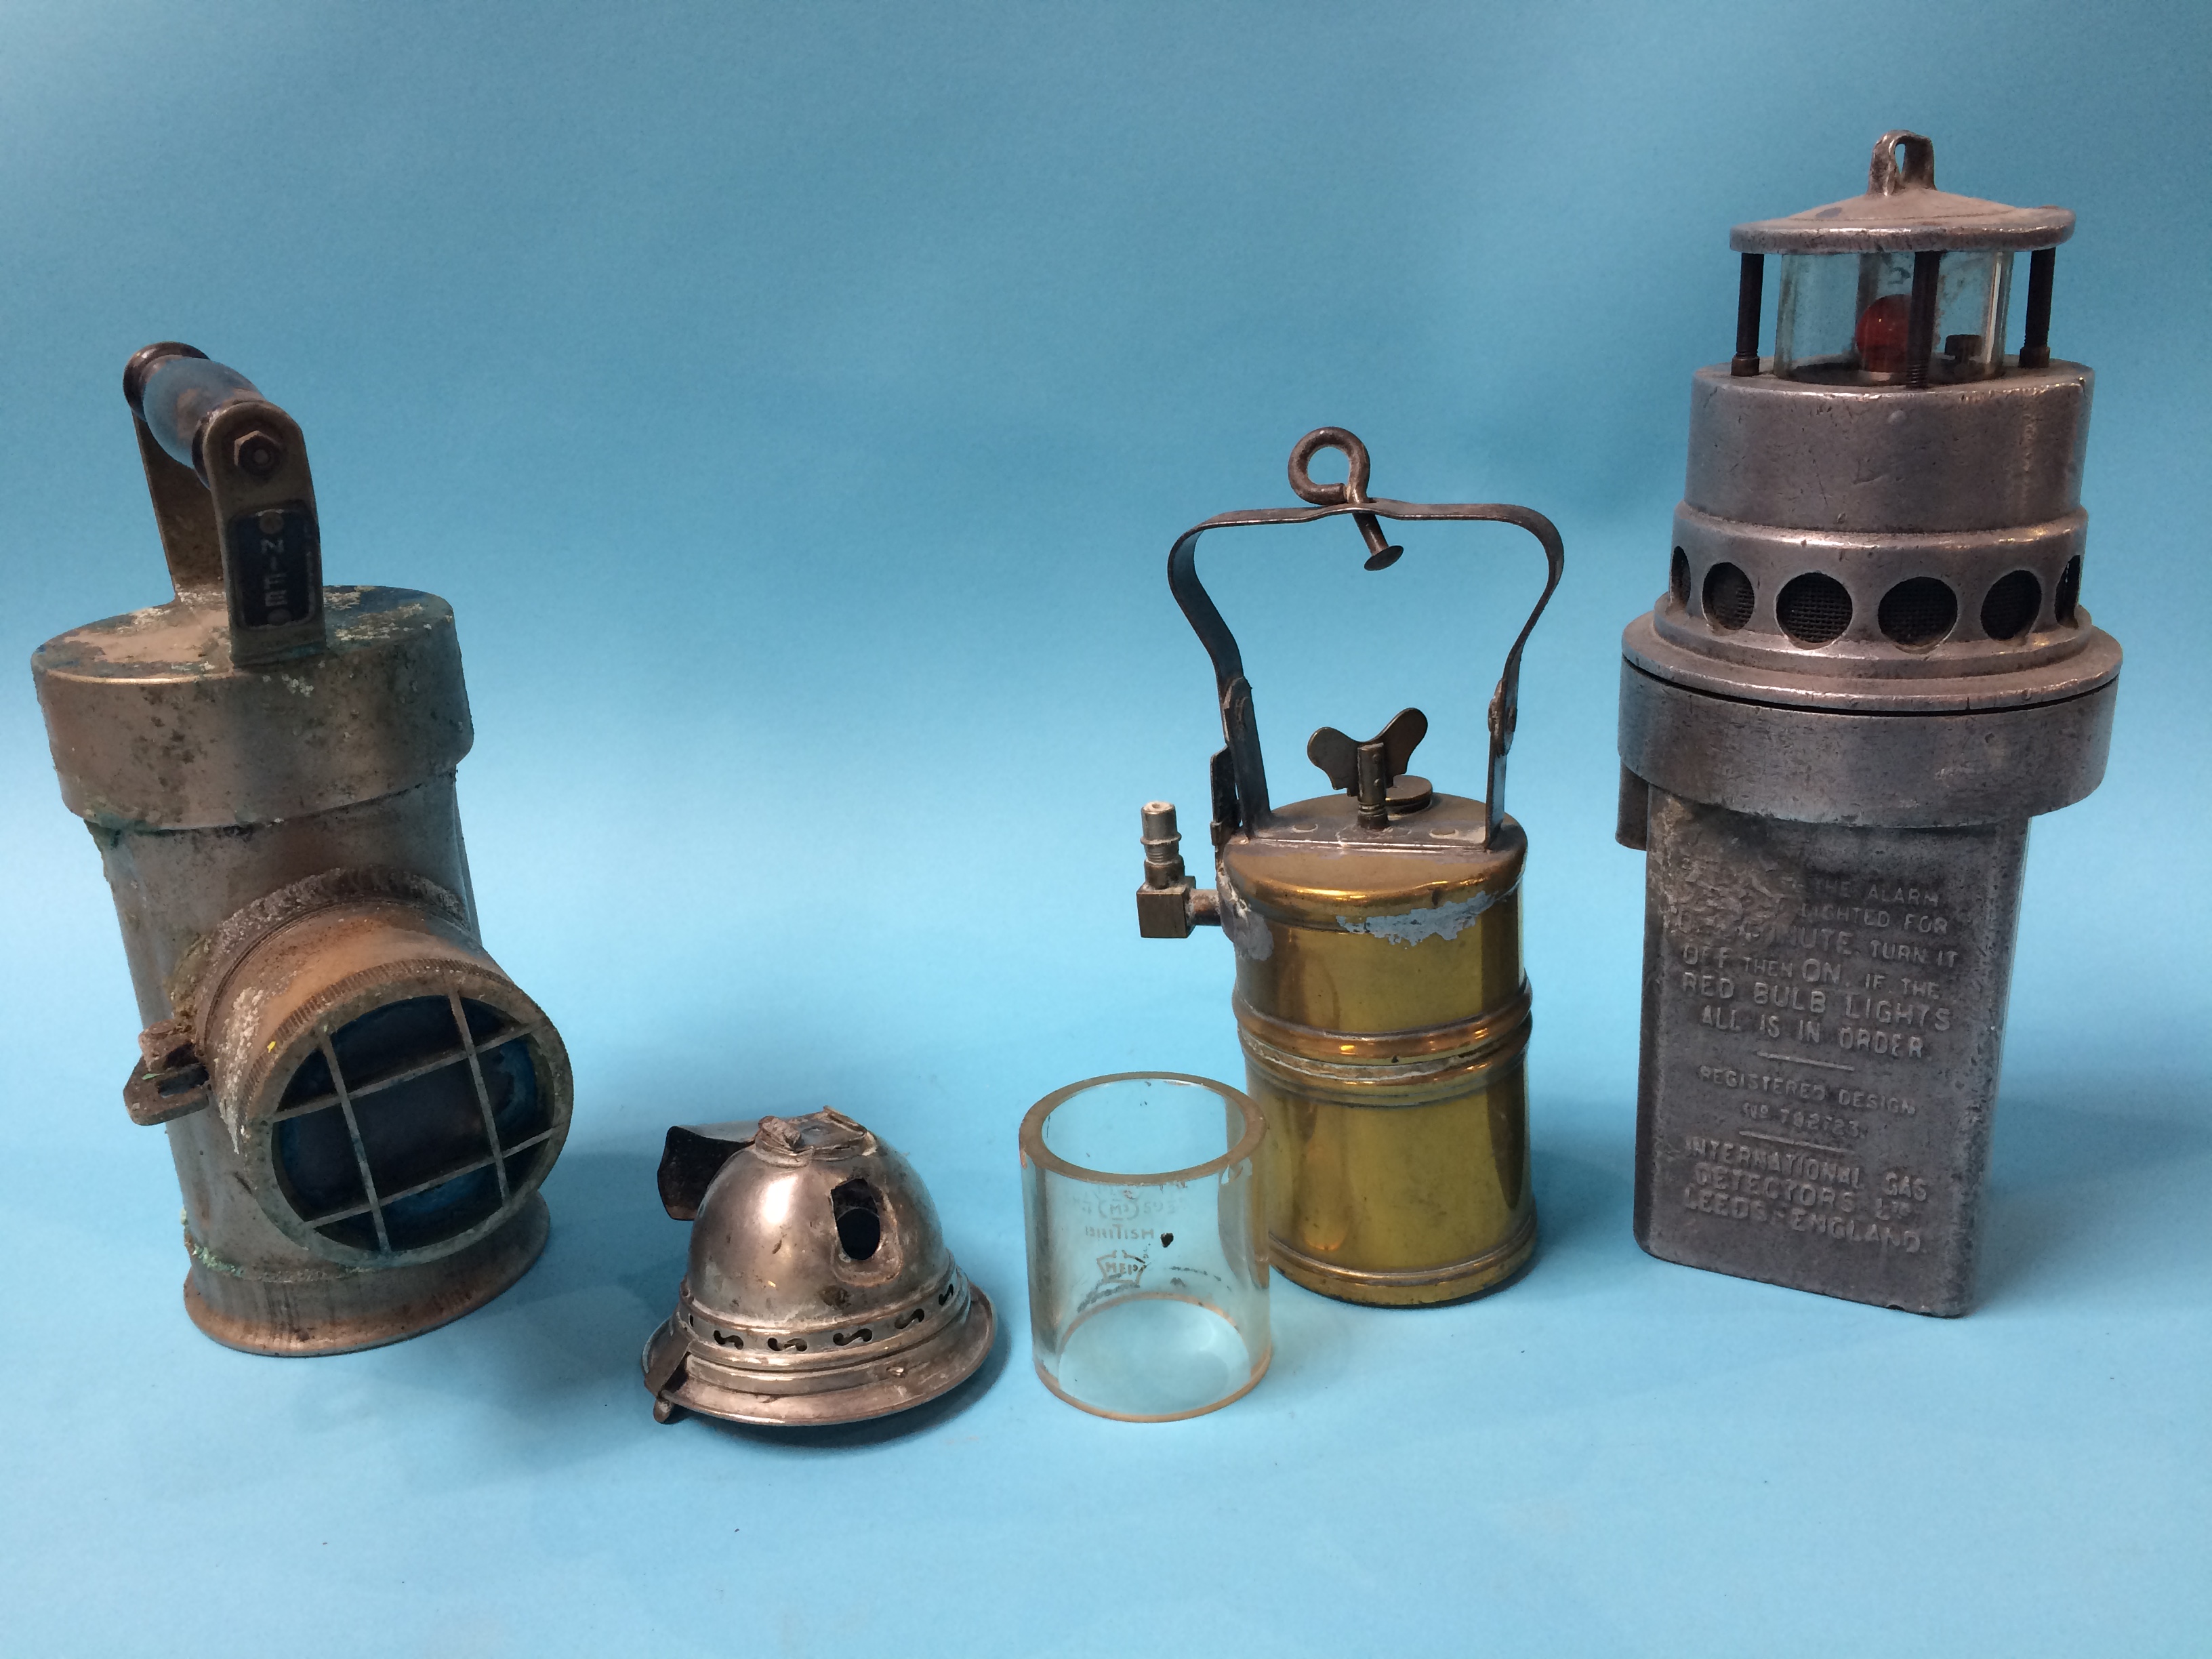 A 'Ringrose' lamp, an NG7 lamp and a small brass lamp